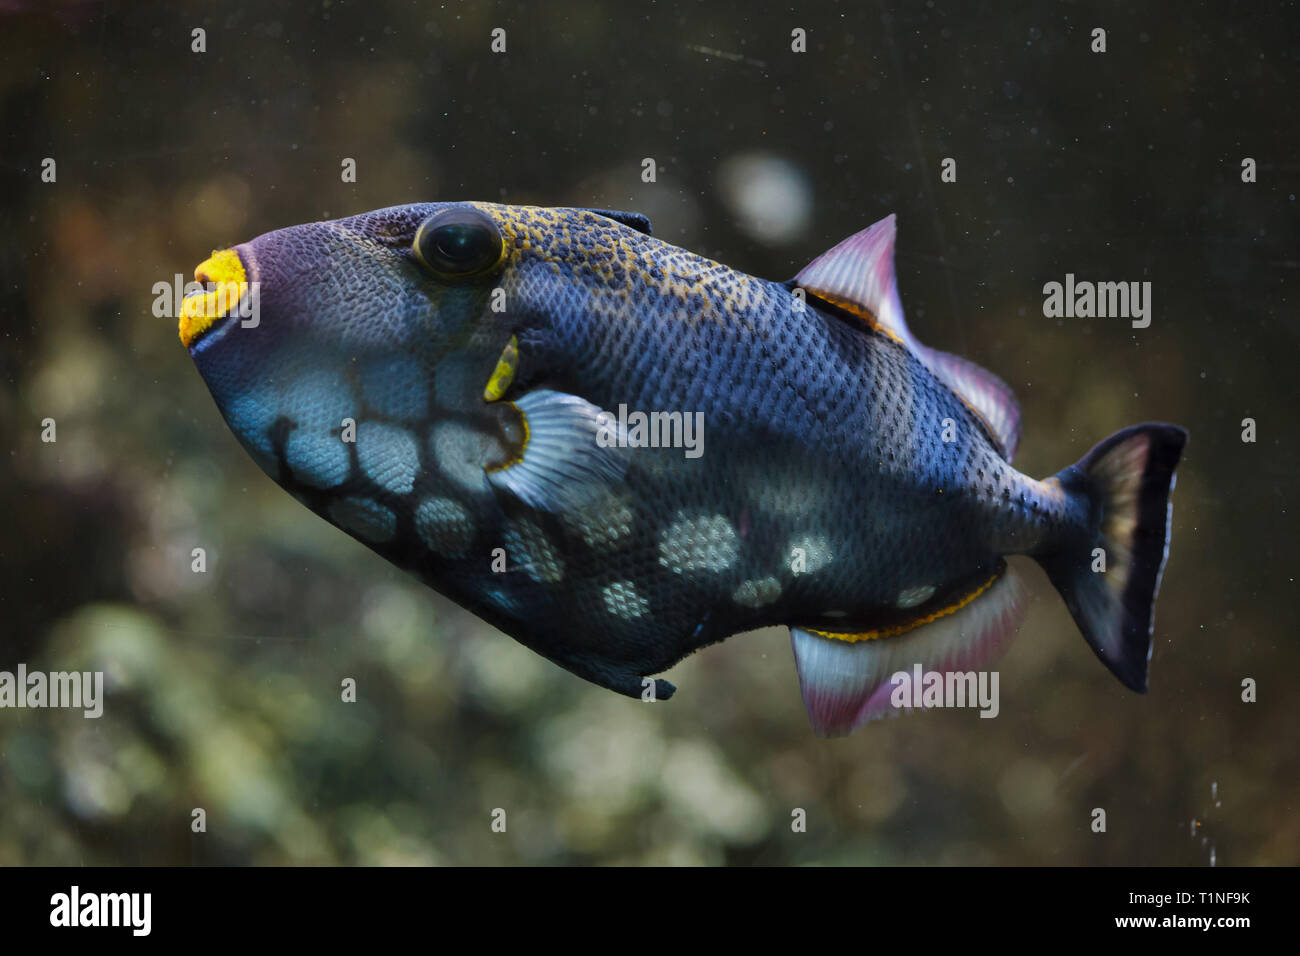 Clown triggerfish (Balistoides conspicillum), also known as the bigspotted triggerfish. Stock Photo